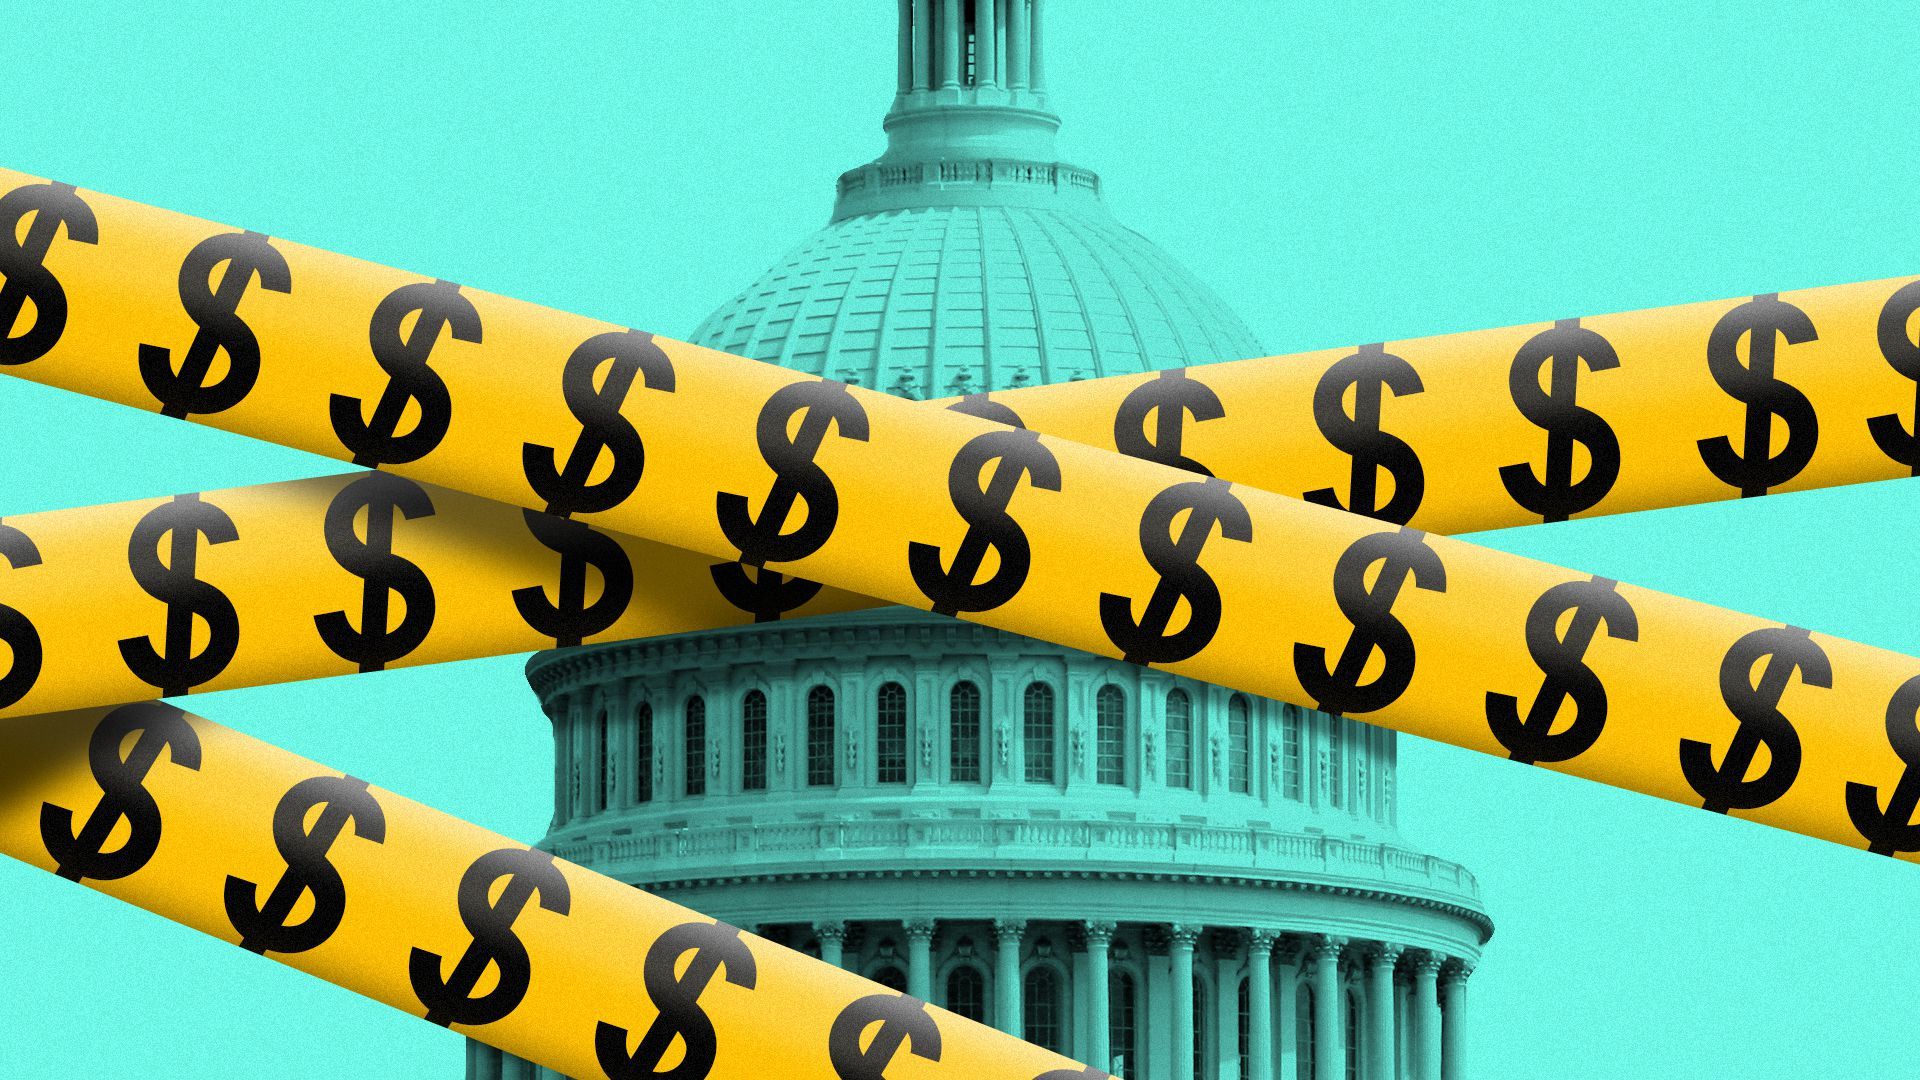 Illustration of caution tape with dollar signs on it covering the Capitol Dome